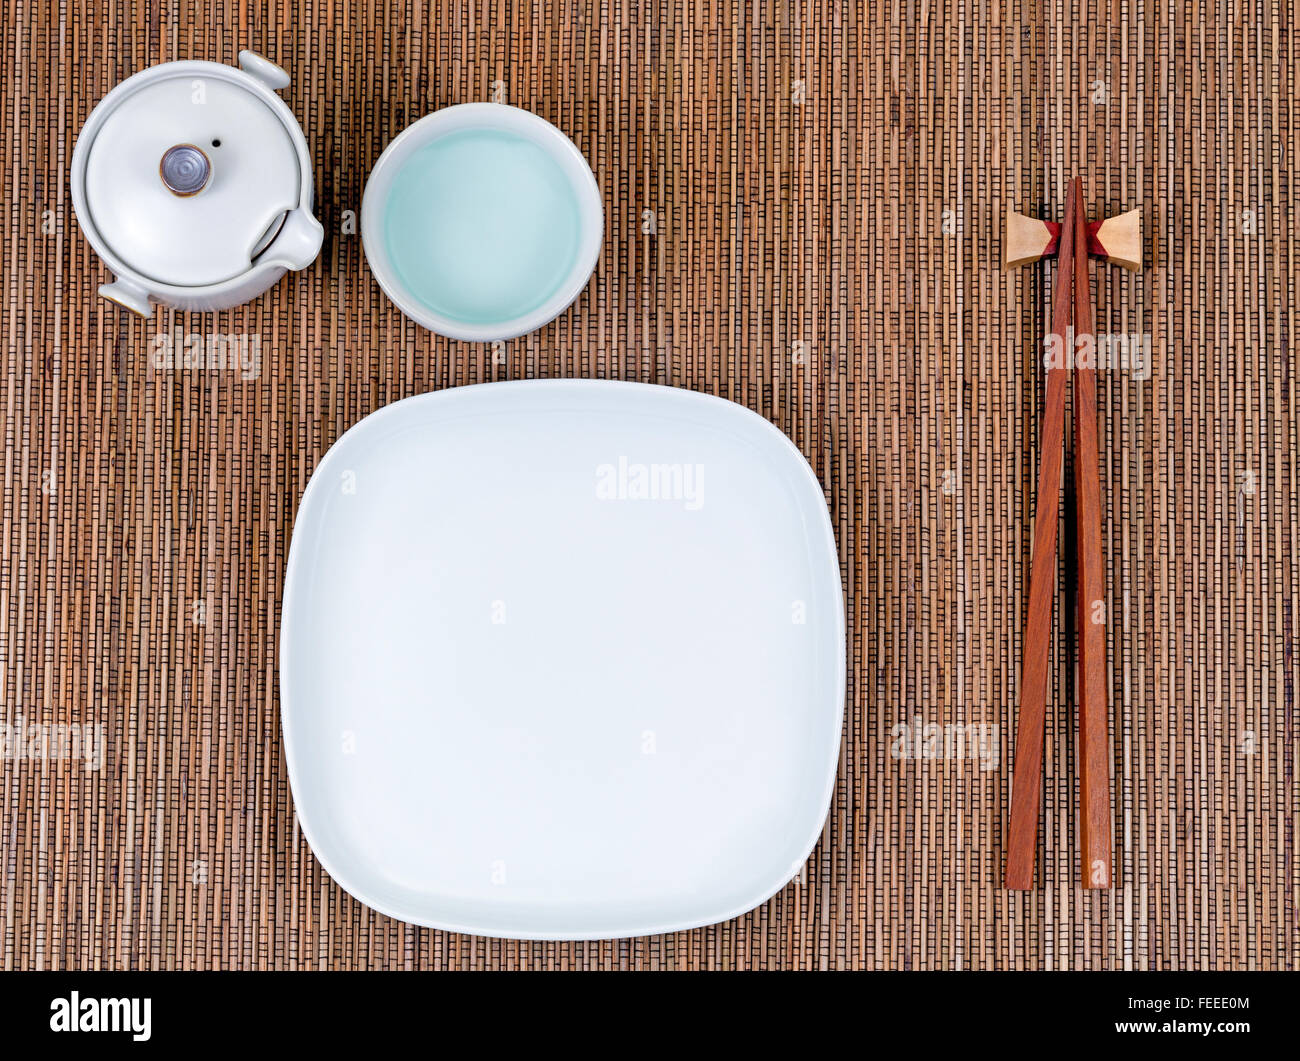 Overhead view of chopsticks, plate, cup and tea server on bamboo mat. Stock Photo